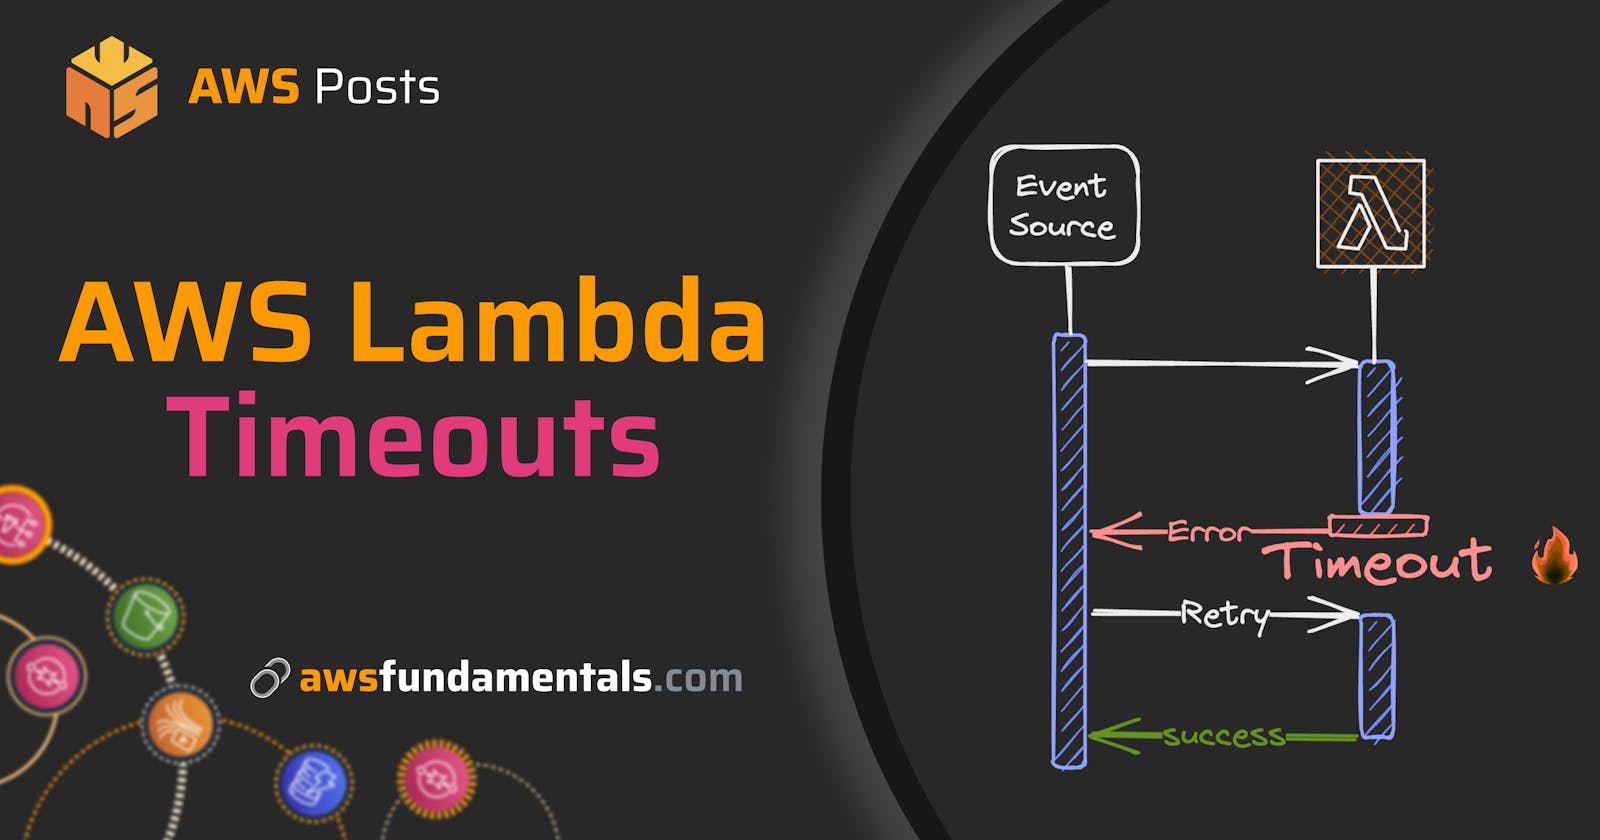 Best Practices to Avoid and Troubleshoot Timeouts in AWS Lambda